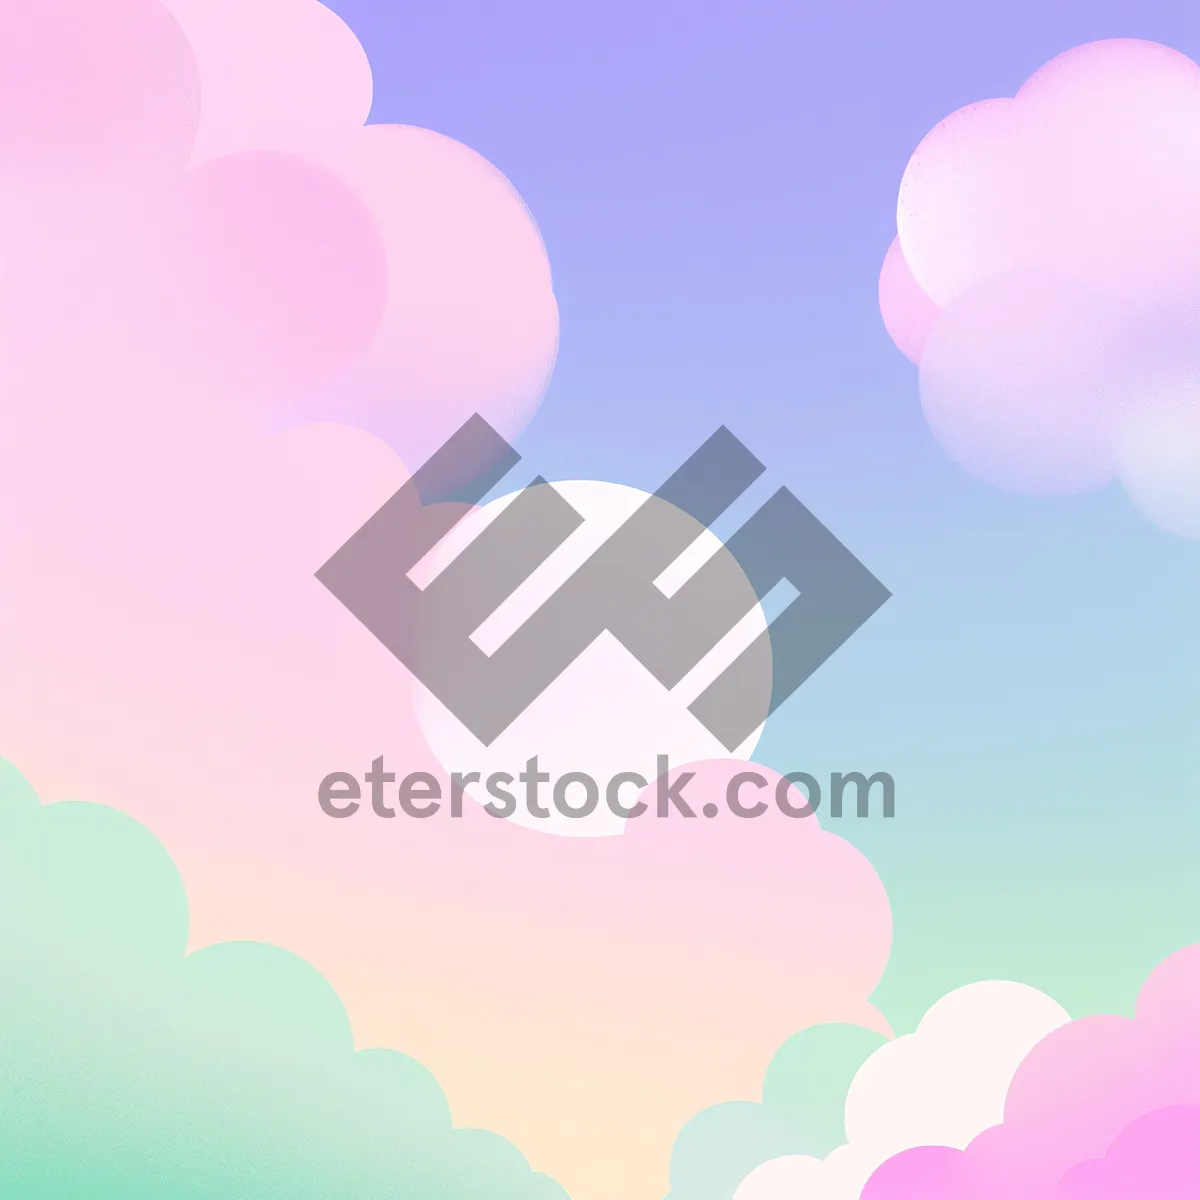 Picture of Abstract Cloud Icons Set: Stylish Graphic Symbols with a Shape Design